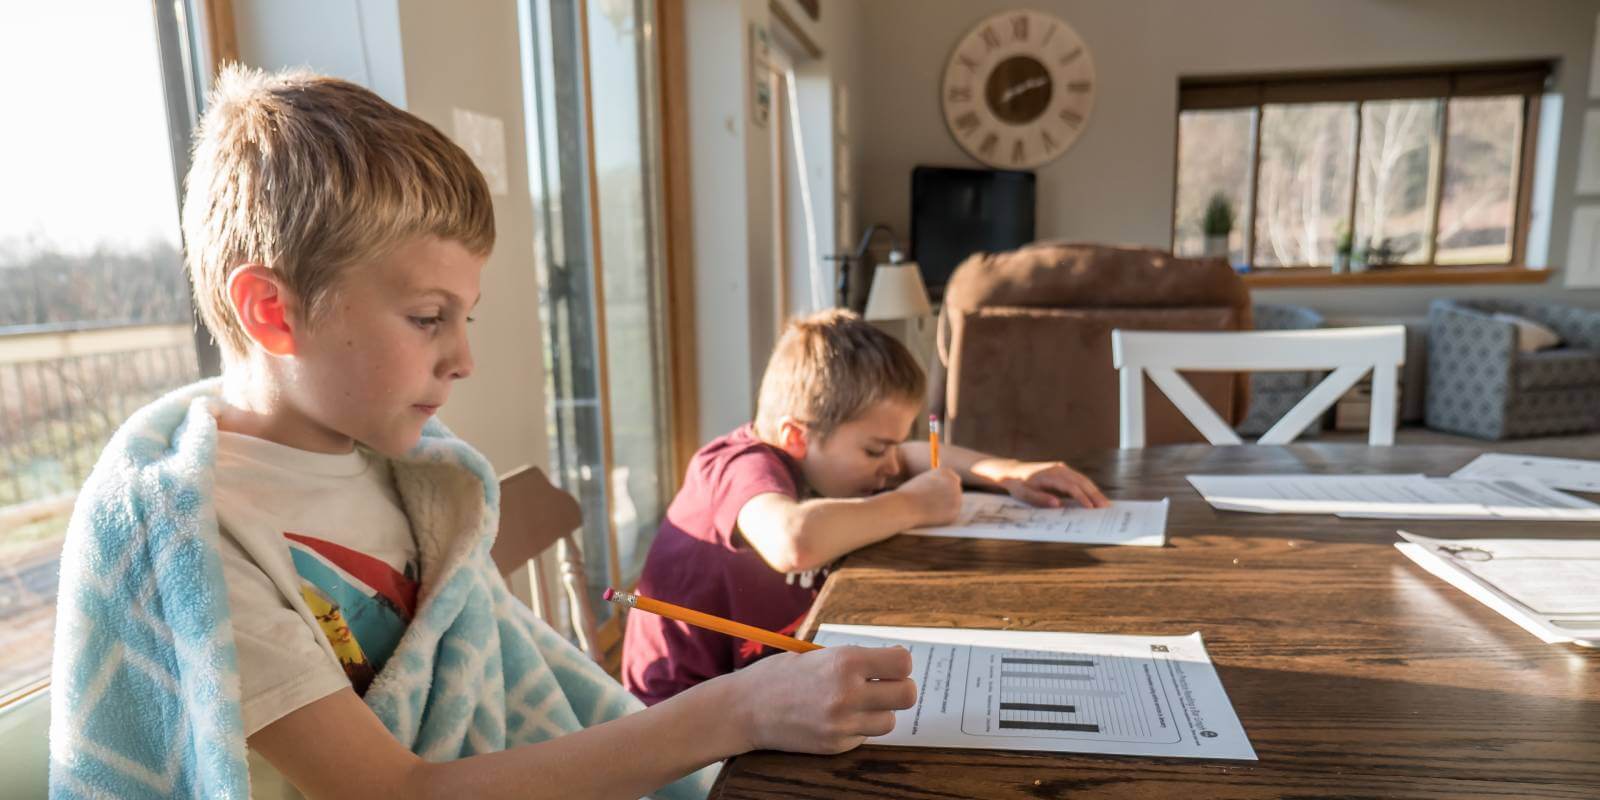 How To Easily Adjust to Home Schooling